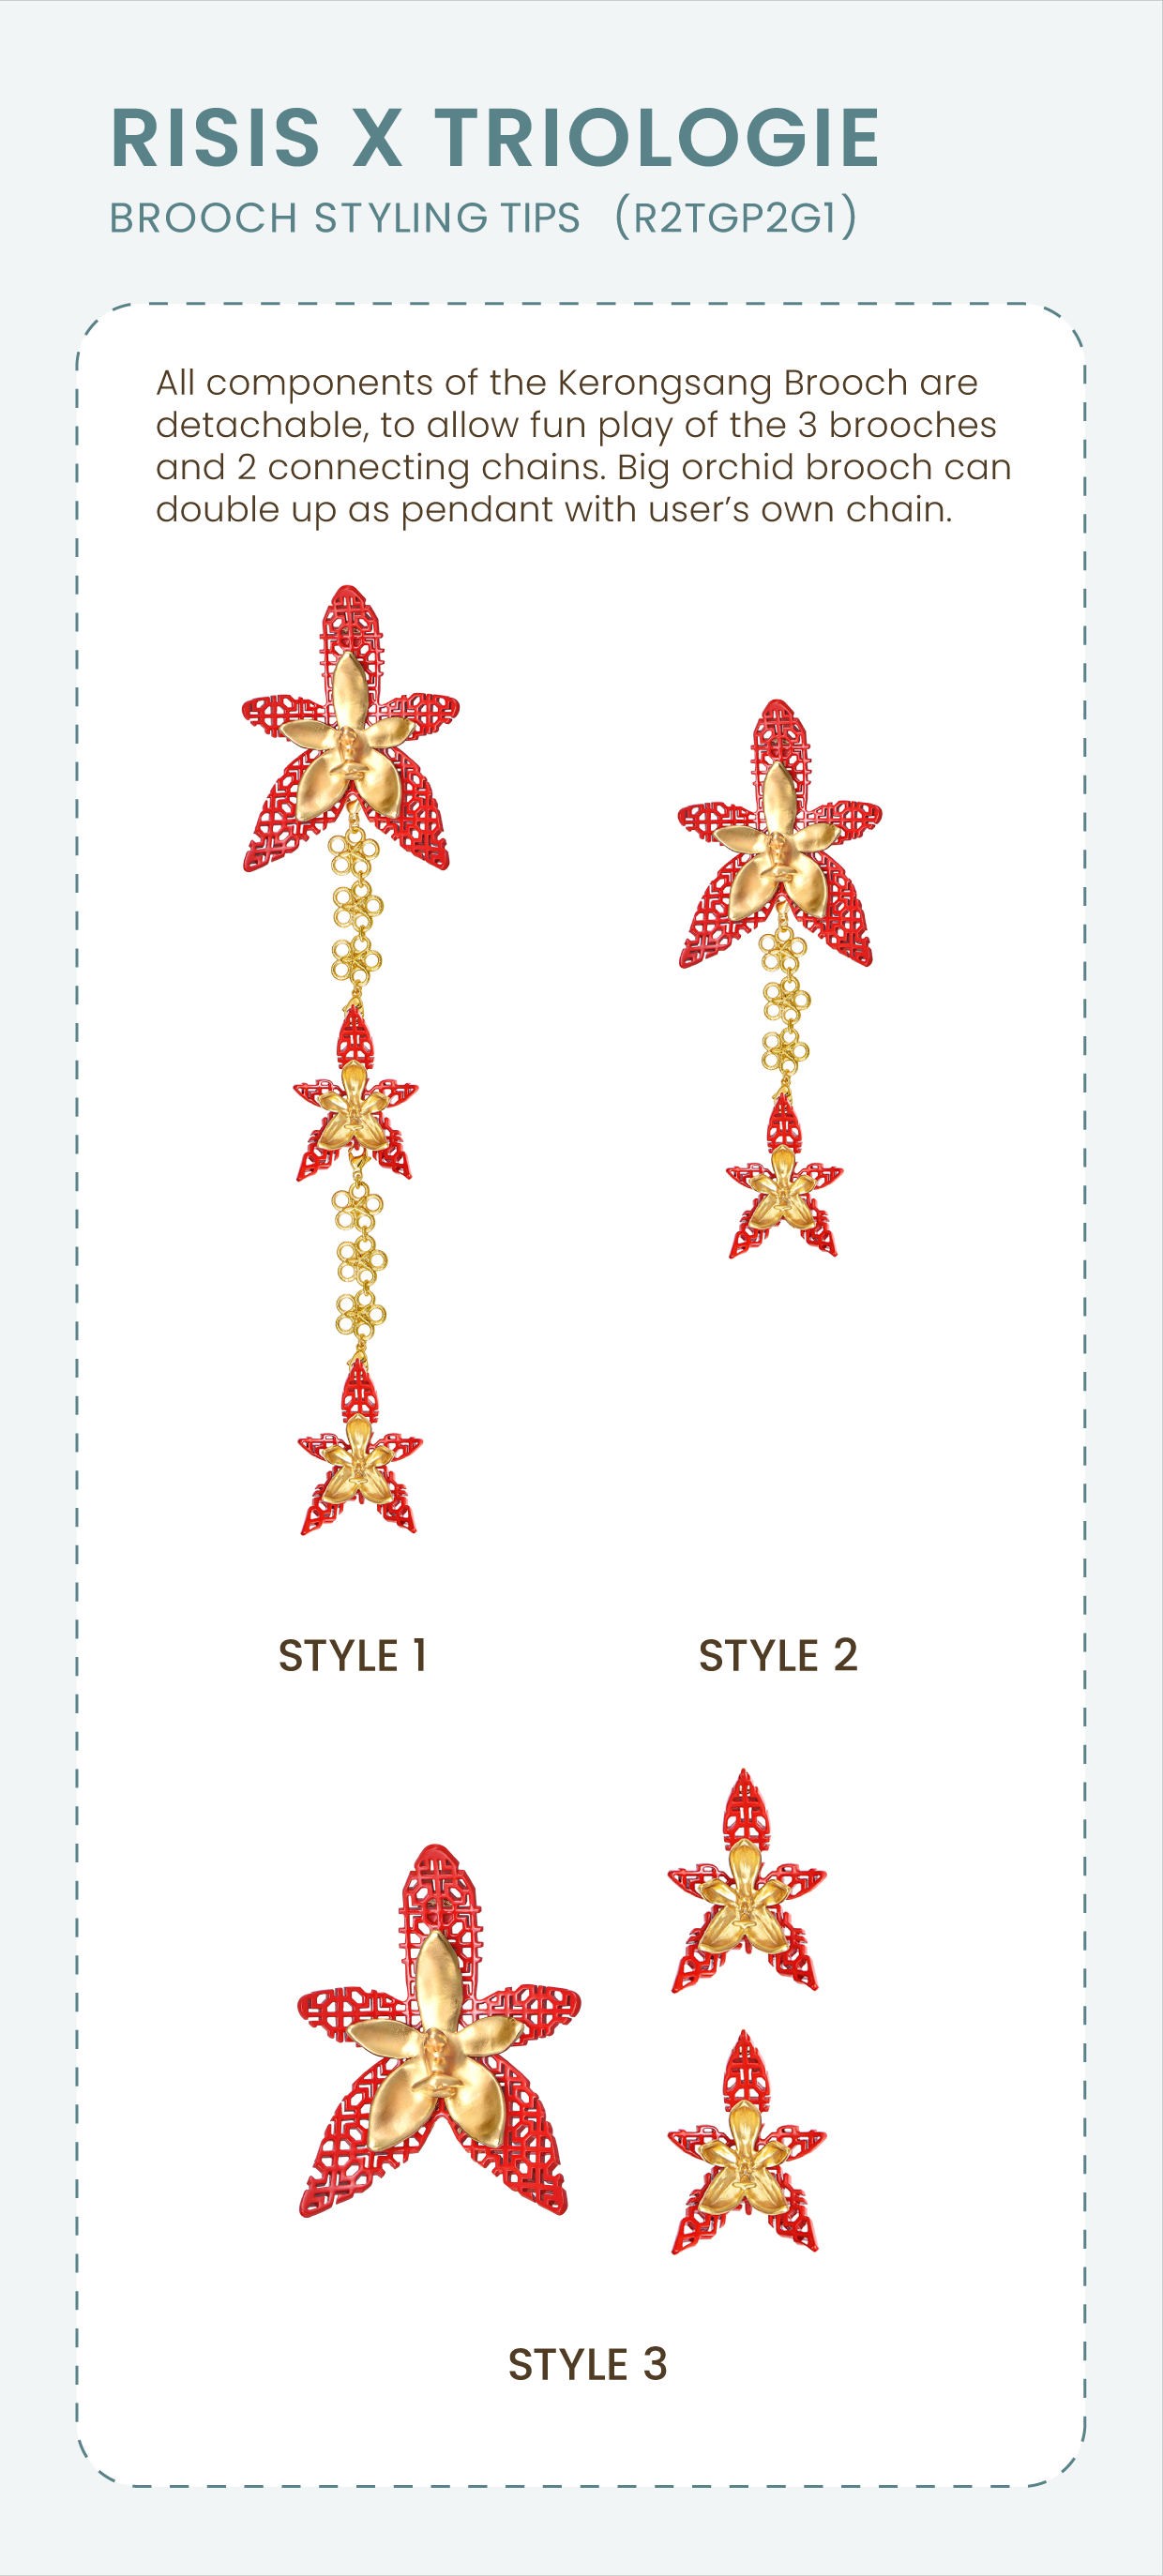 Style Guide of RISIS X TRIOLOGIE Iconic Phalaenopsis Orchid Kerongsang Brooch